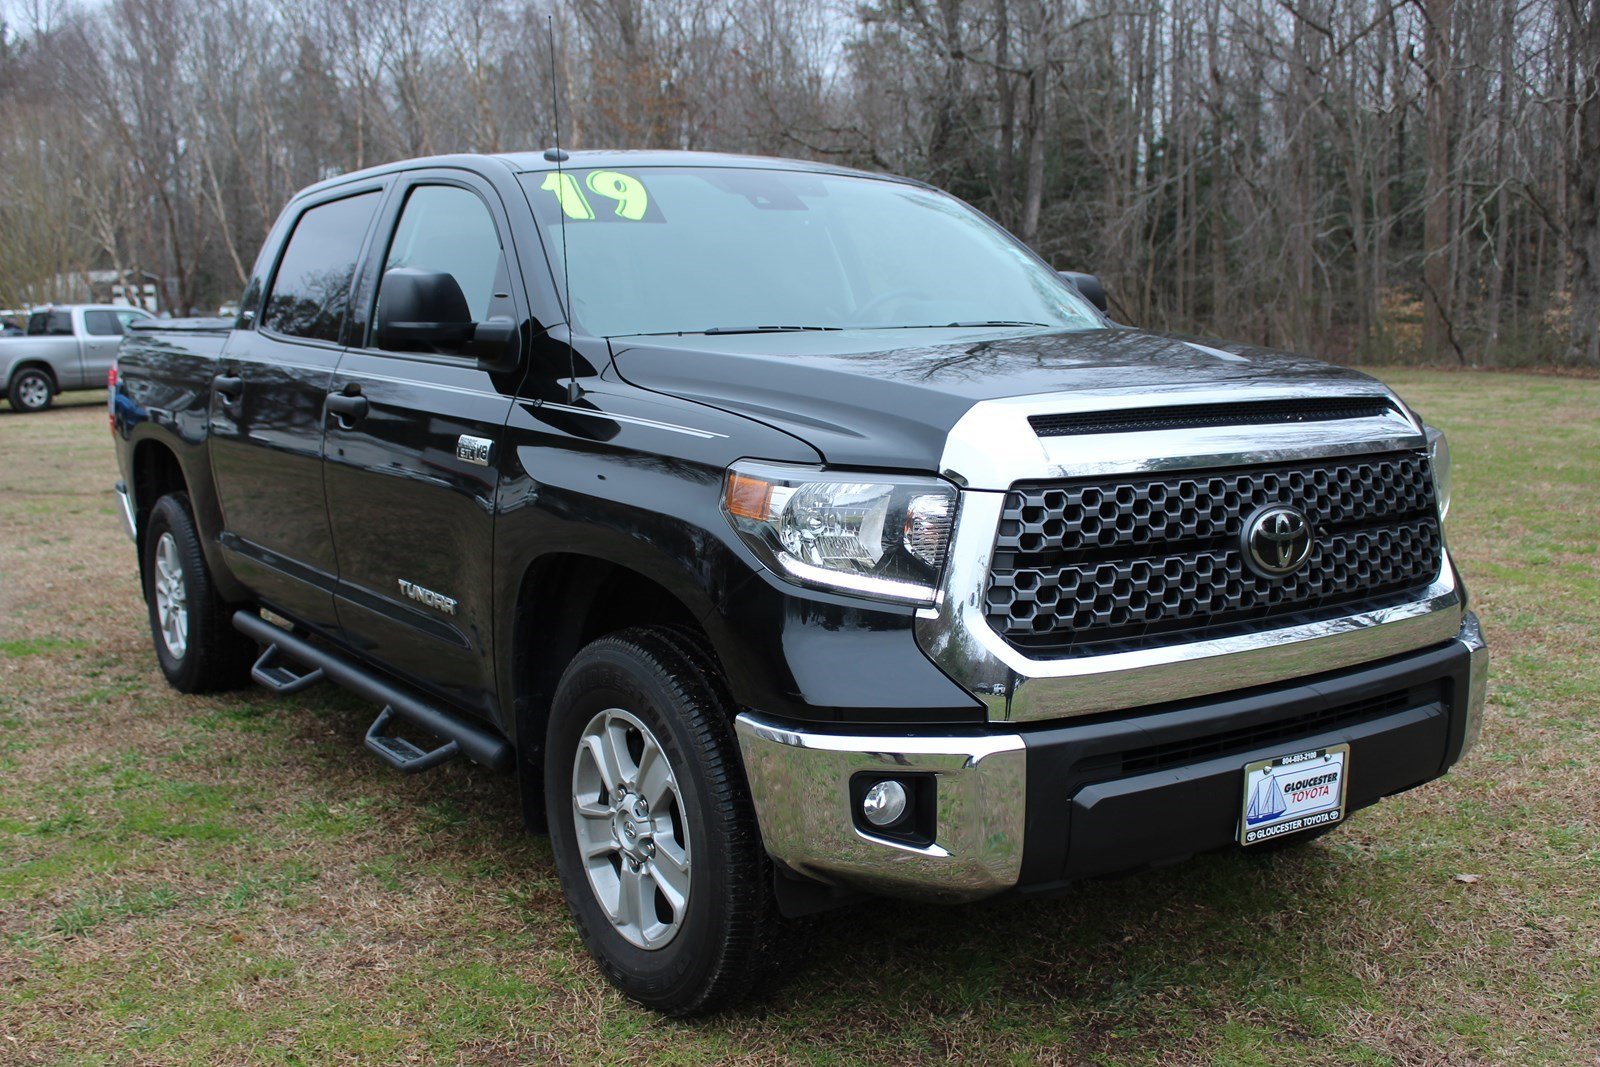 Pre-Owned 2019 Toyota Tundra 4WD SR5 Crew Cab Pickup in Gloucester #